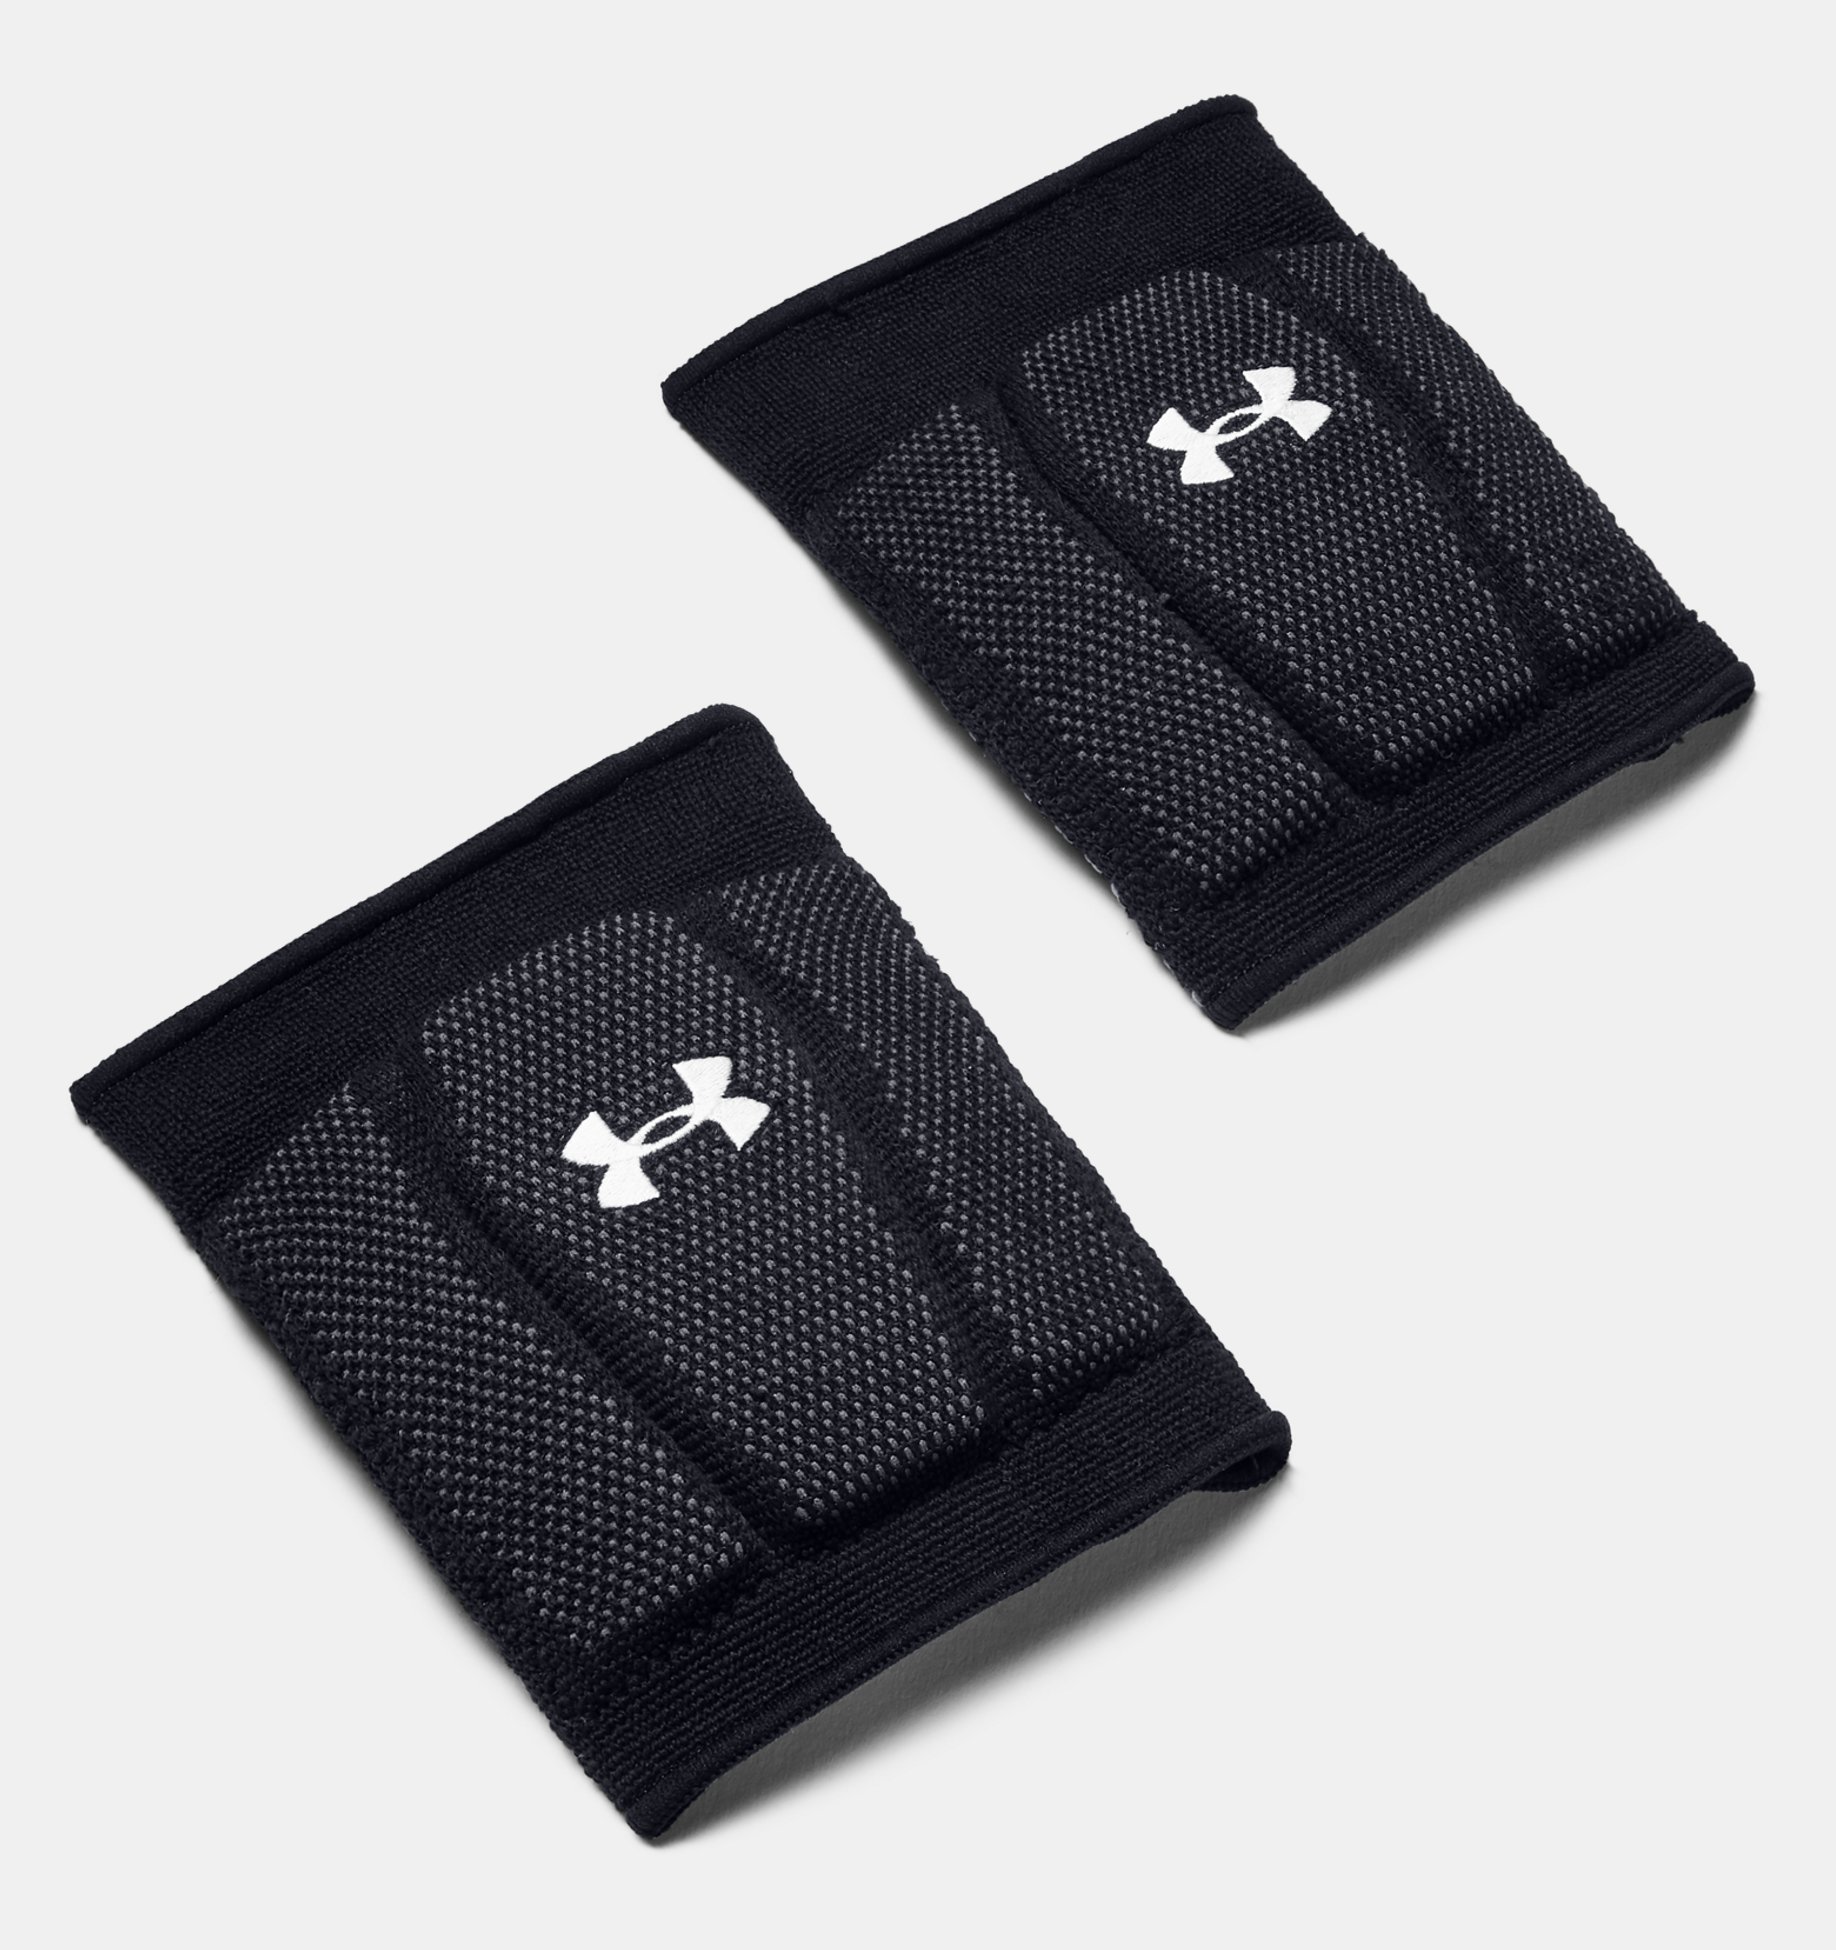 Under Armour Volleyball Knee Pad